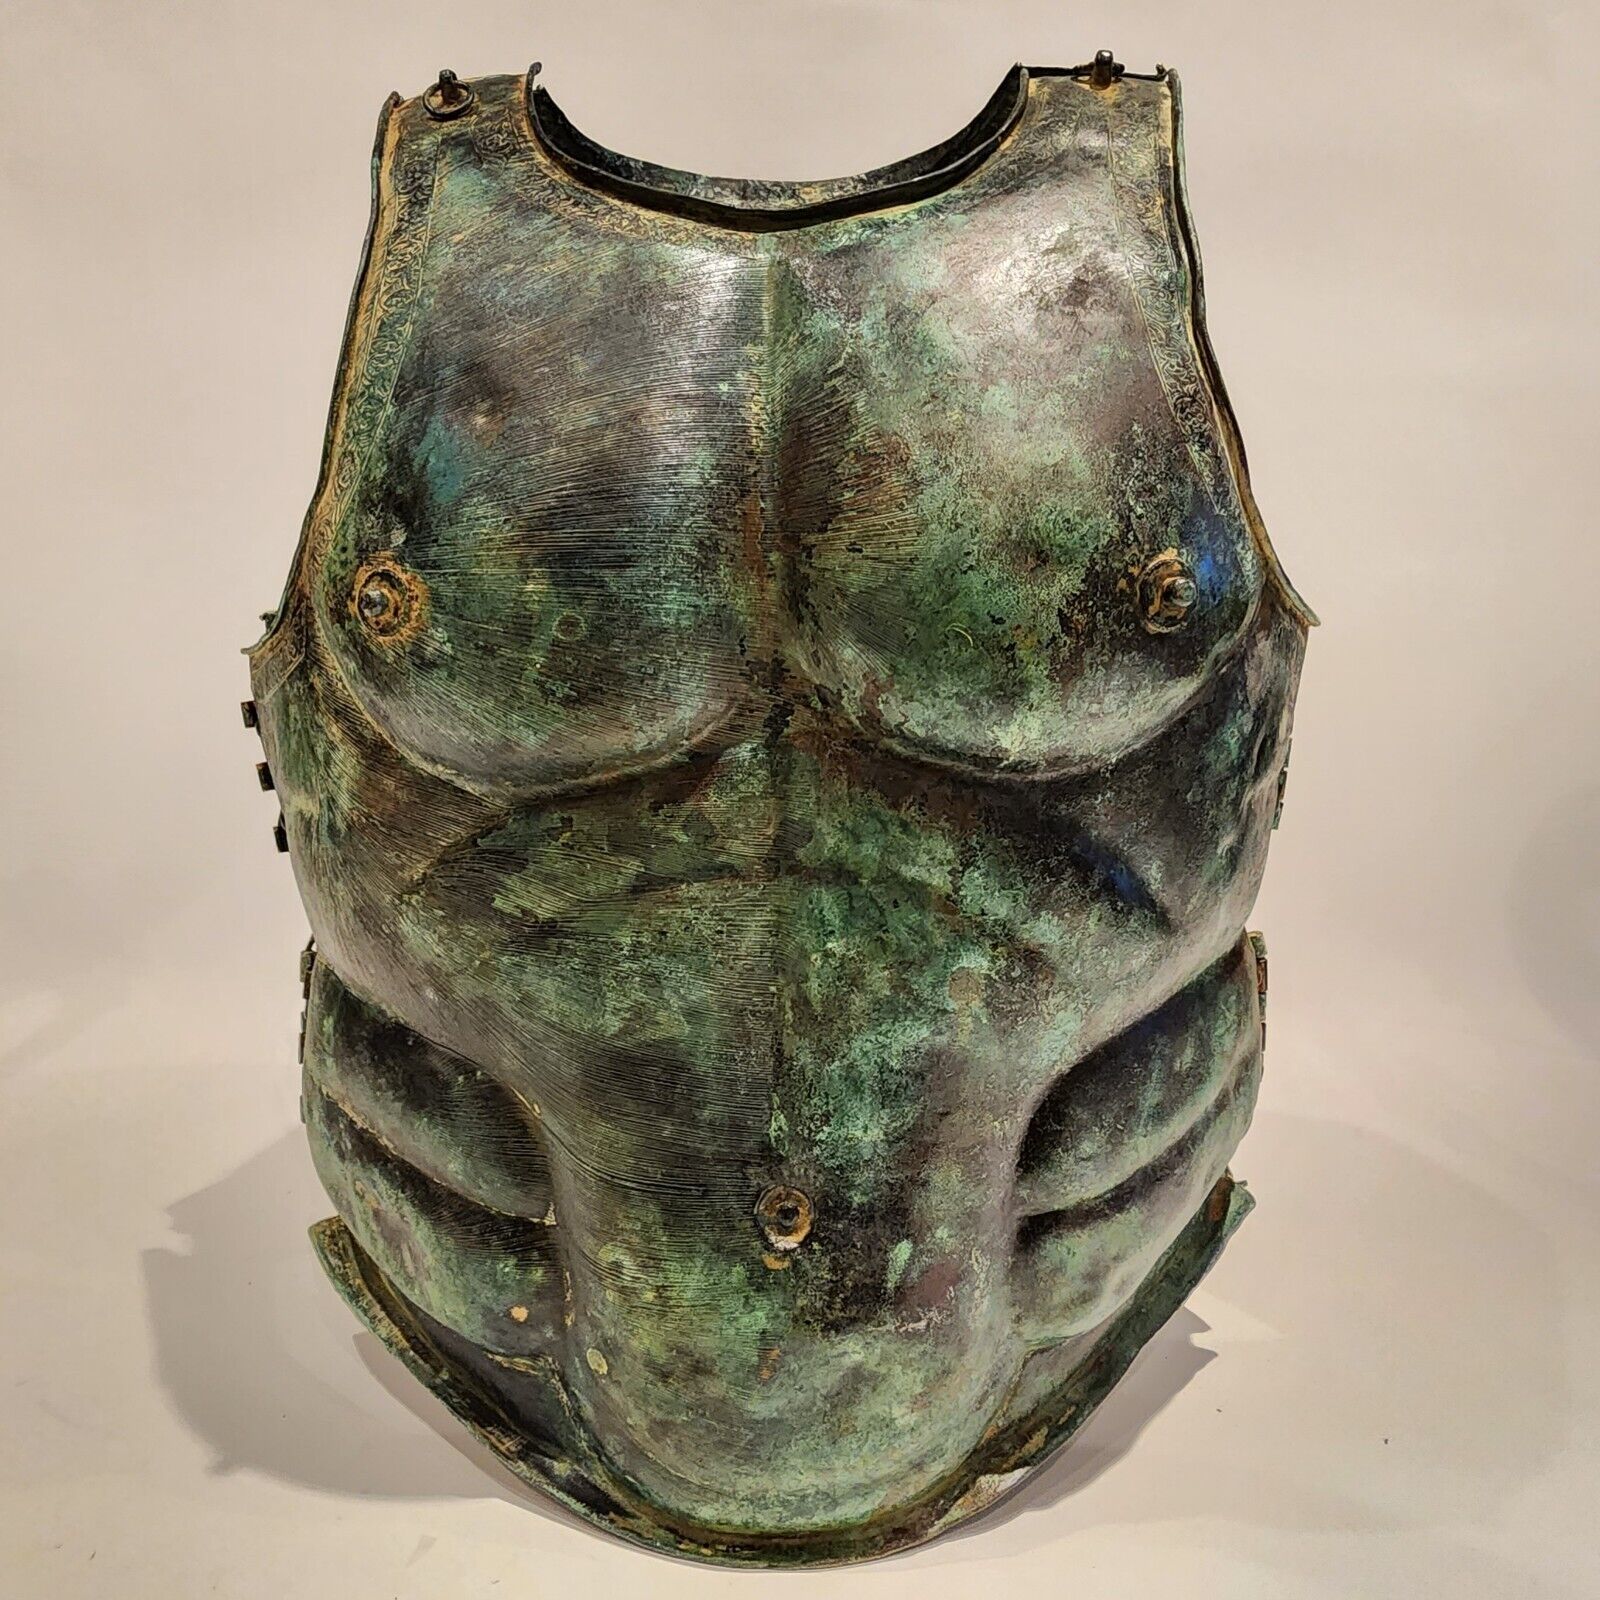 A MUSEUM QUALITY SPECTACULAR GREEK BRONZE MUSCLE CUIRASS BODY ARMOR)